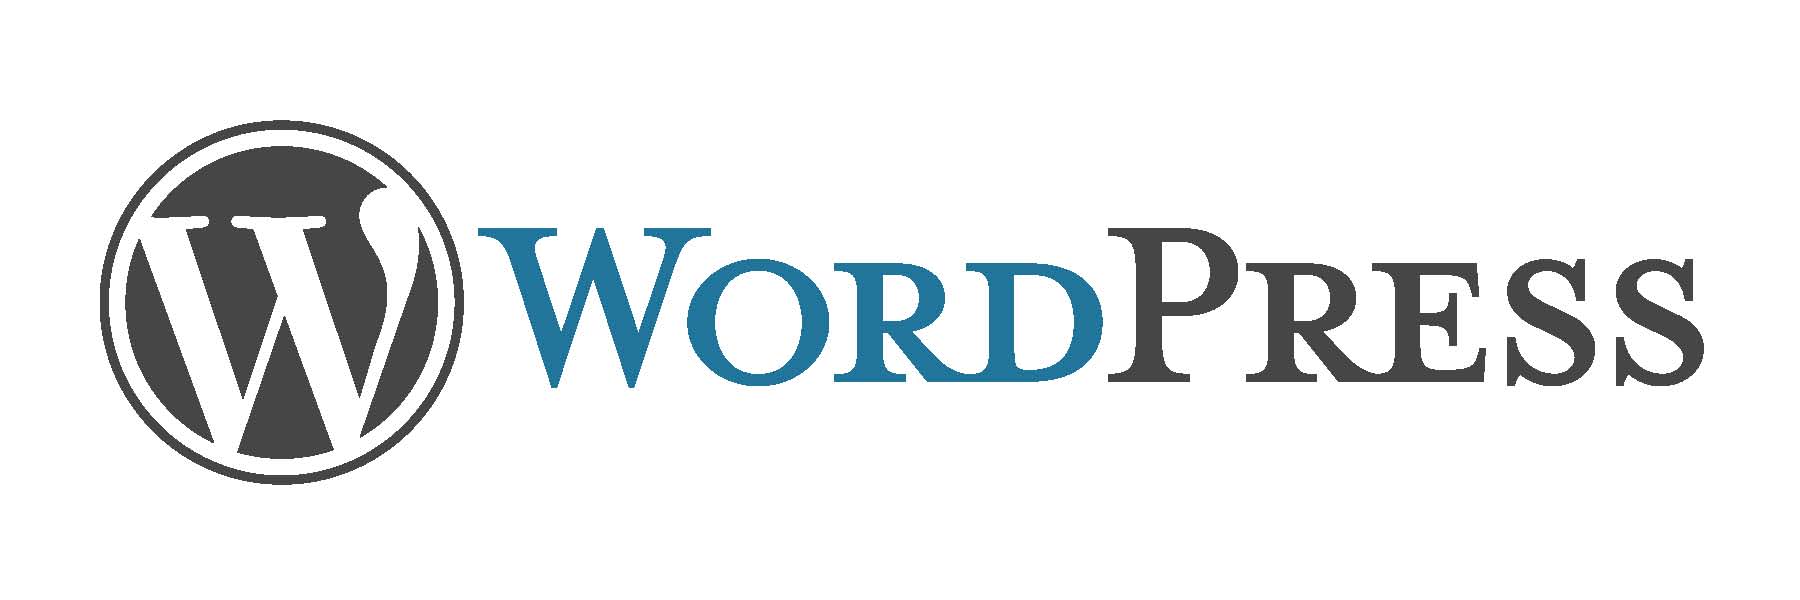 Geek insider, geekinsider, geekinsider. Com,, 9 must-have wordpress plugins for your blog, how to